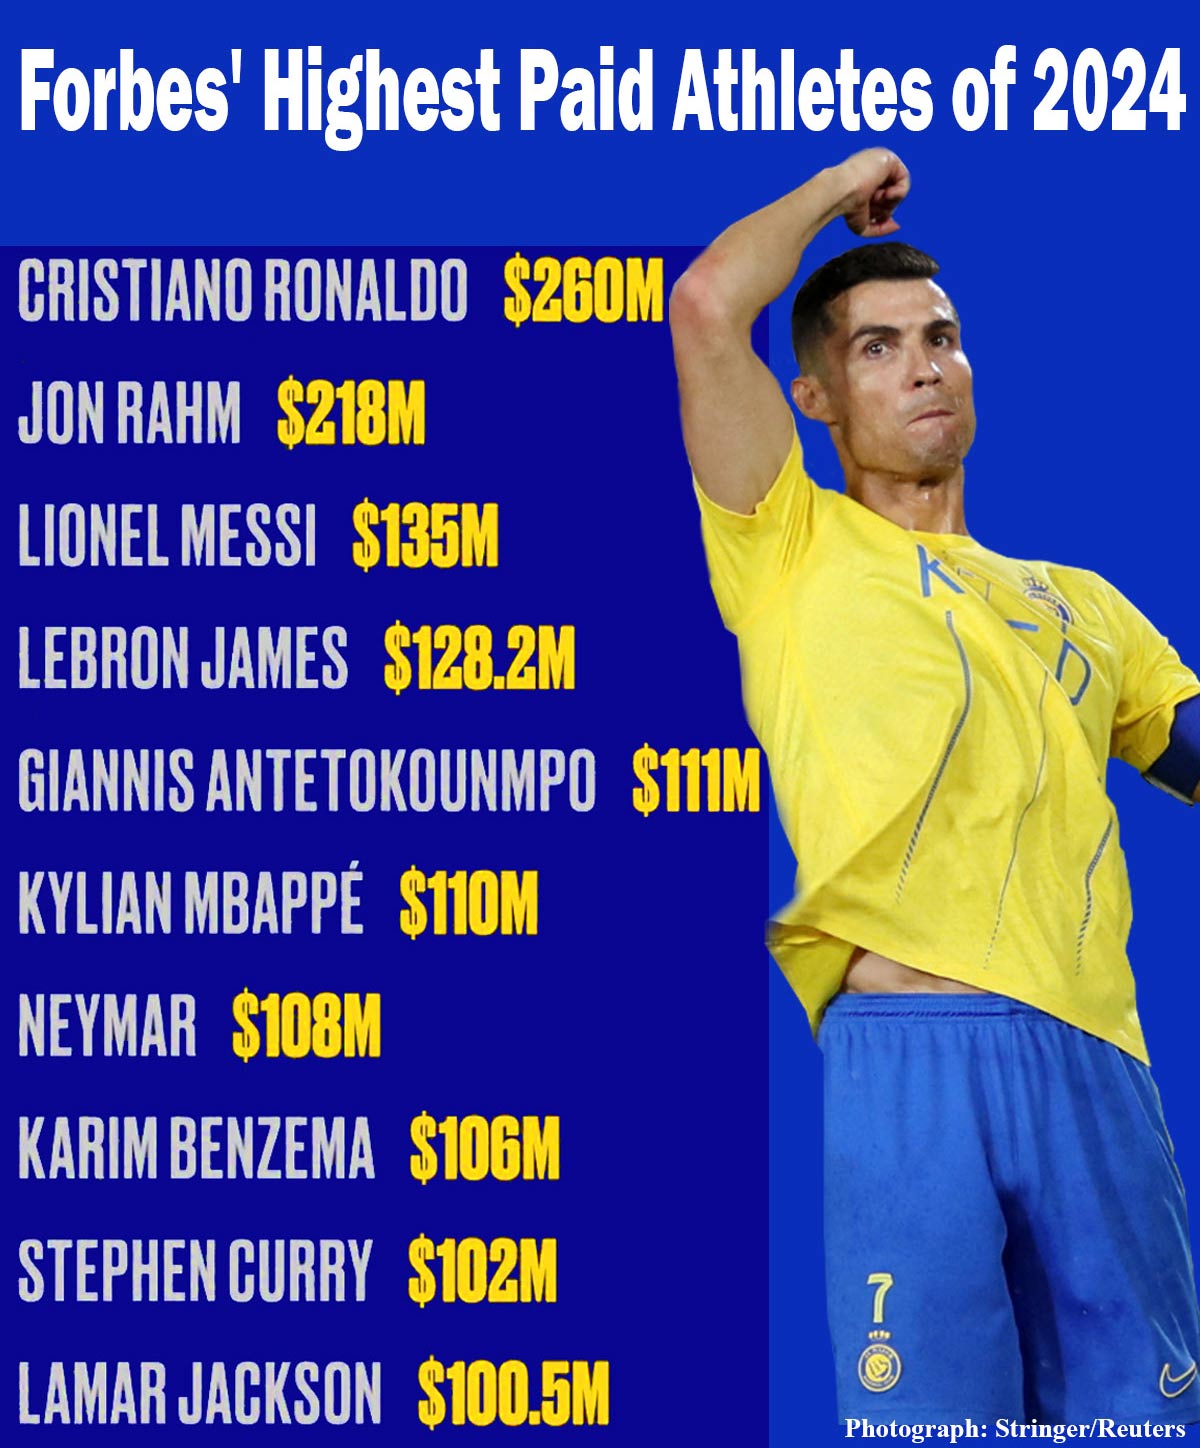 Forbes' list of highest paid athletes